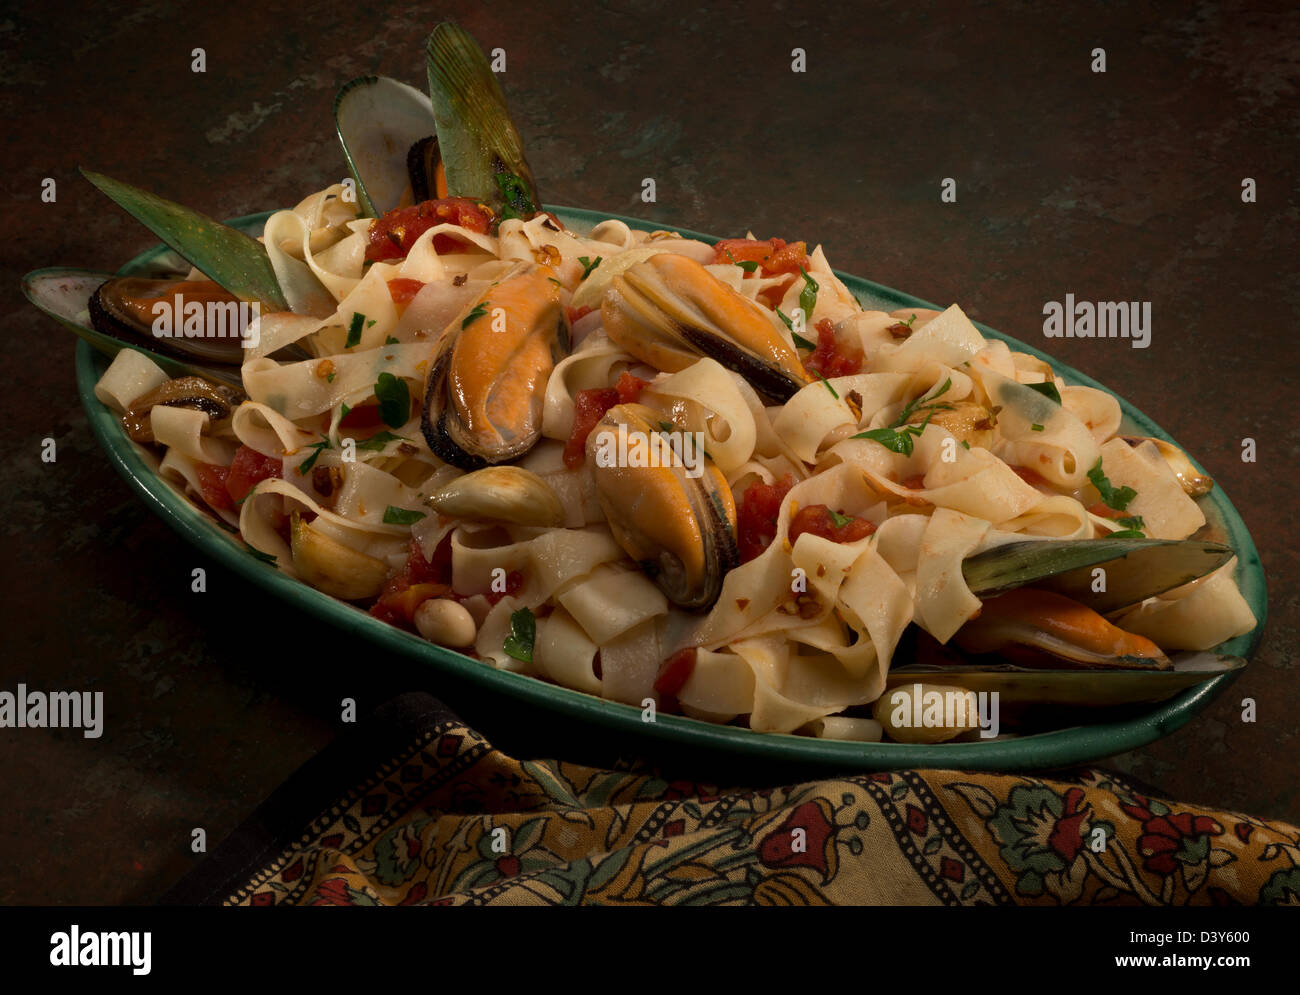 A green Mussel Platter with tagliatelle pasta, cannelini beans, garlic and Italian parsley. Stock Photo